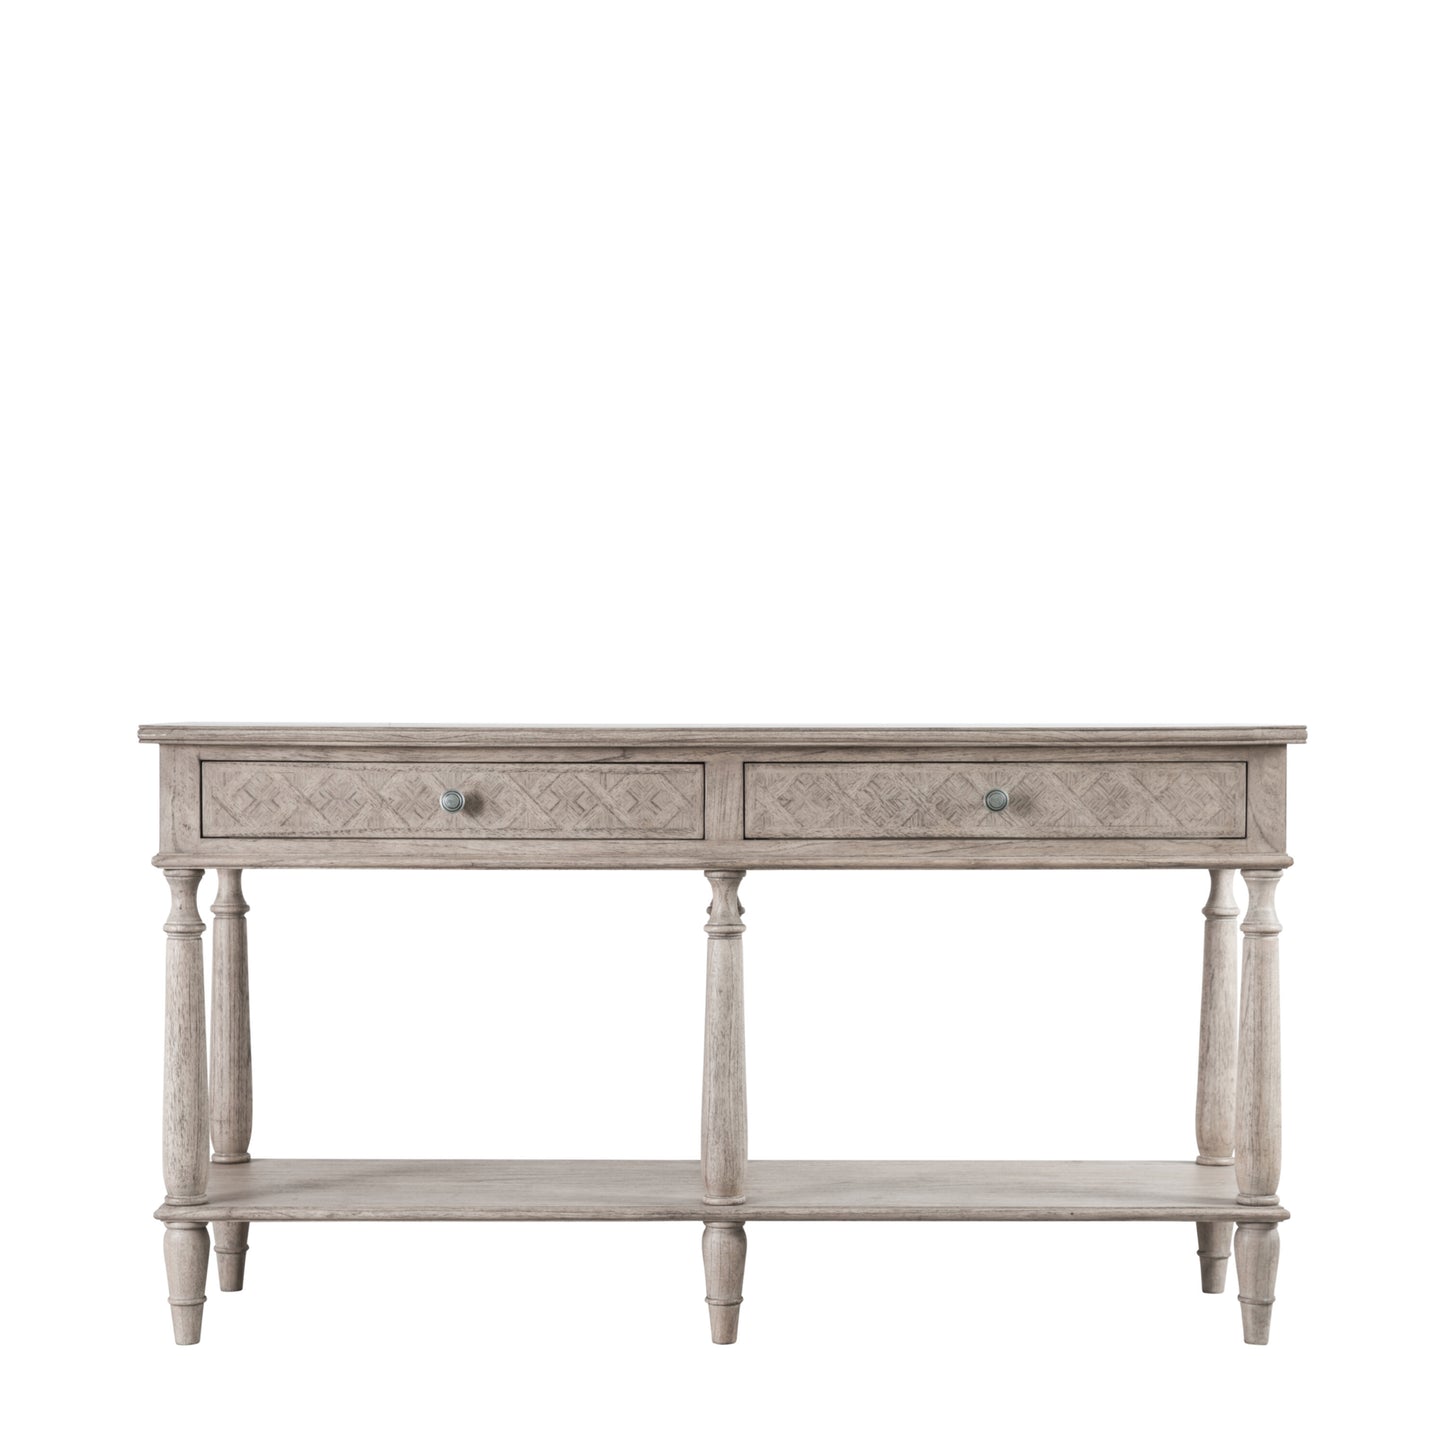 Colonial Parquet Inlay 2 Drawer Console Table 